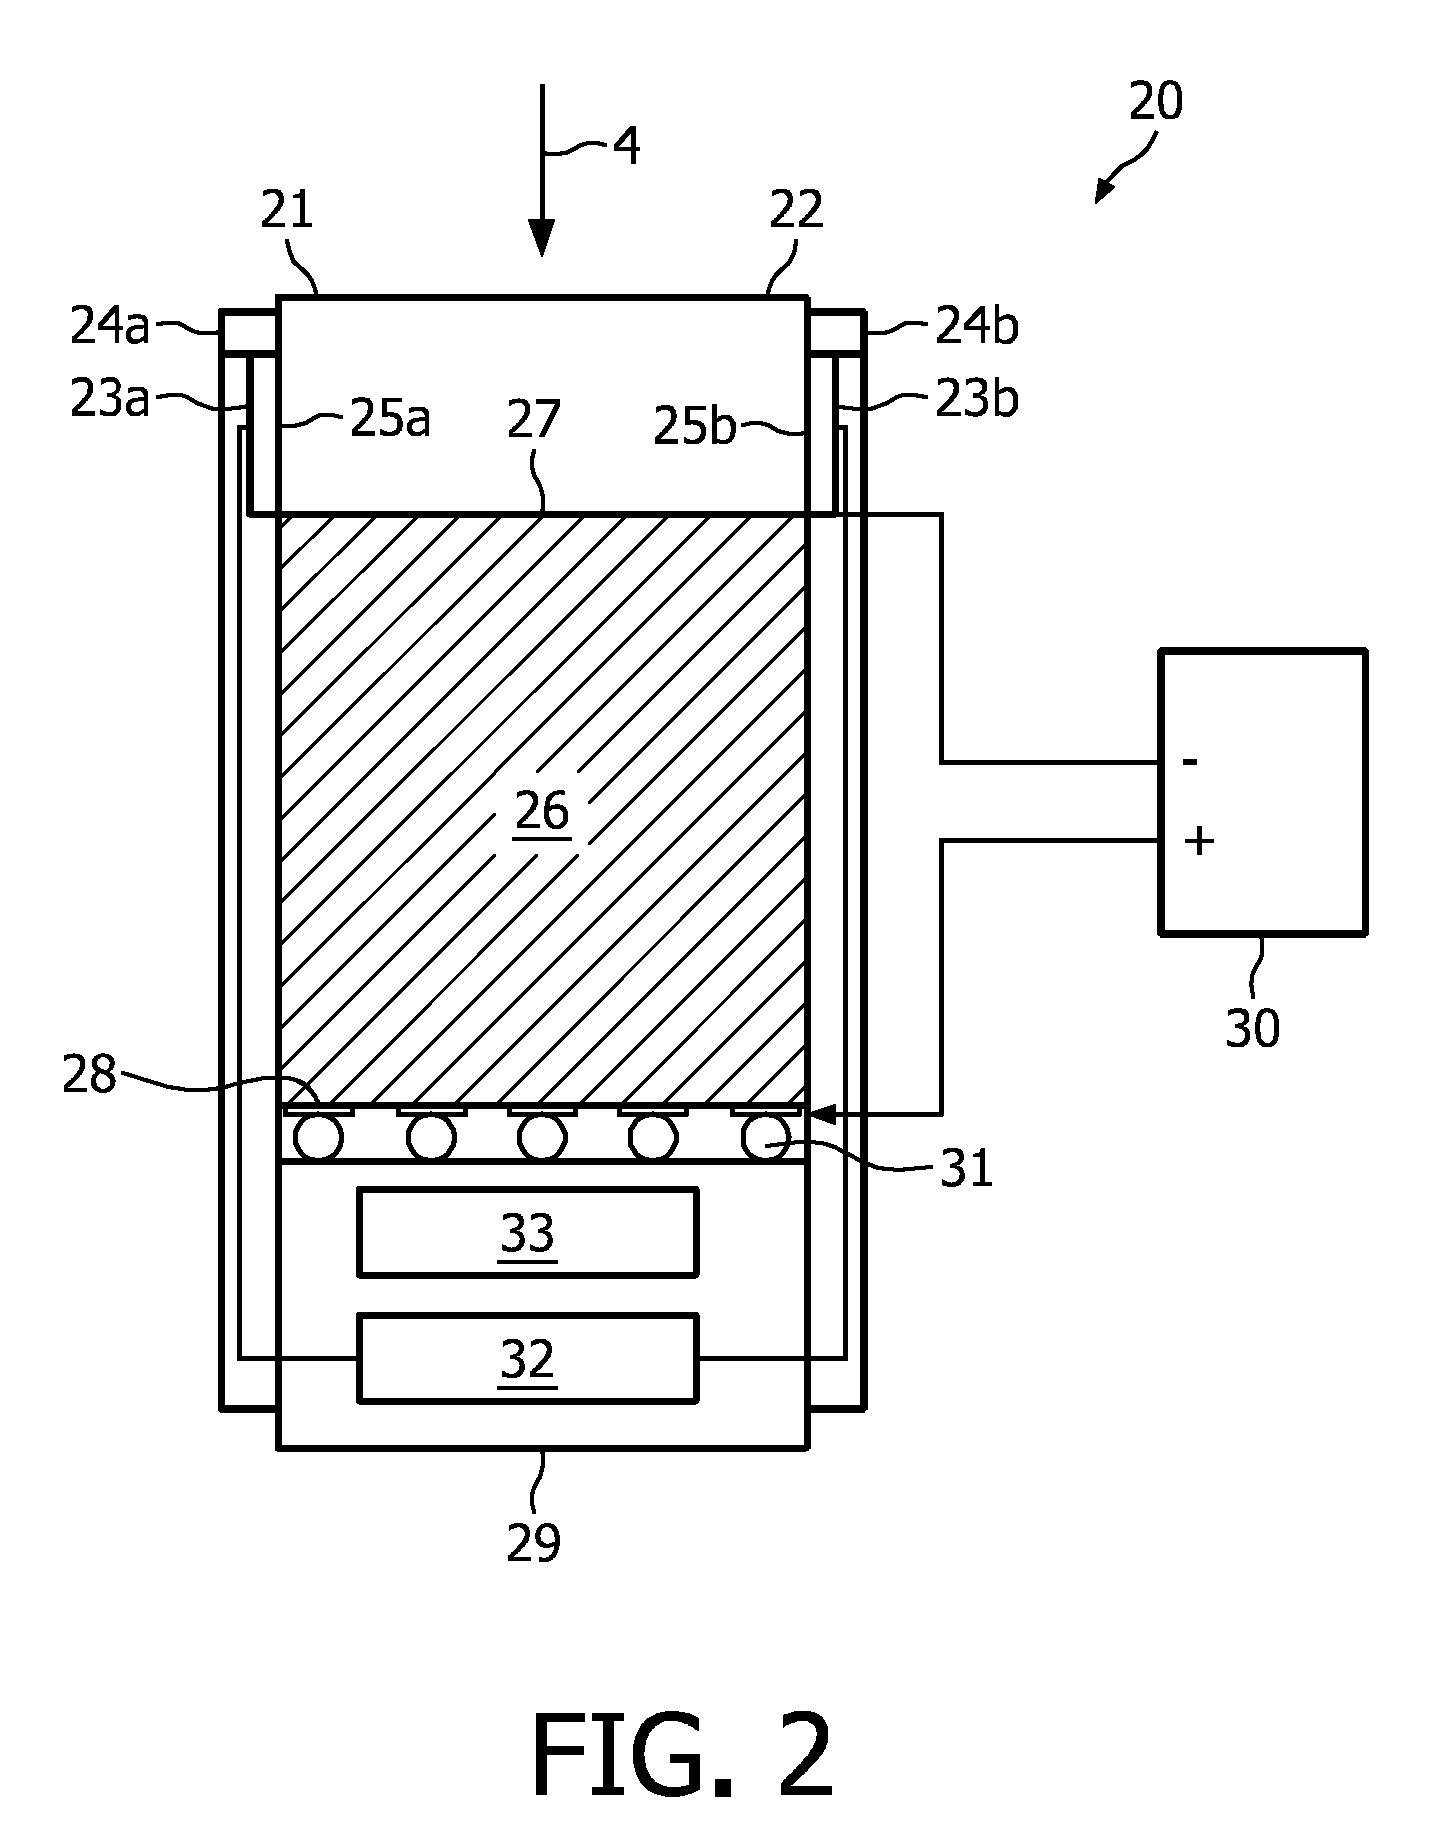 Energy-resolving detection system and imaging system